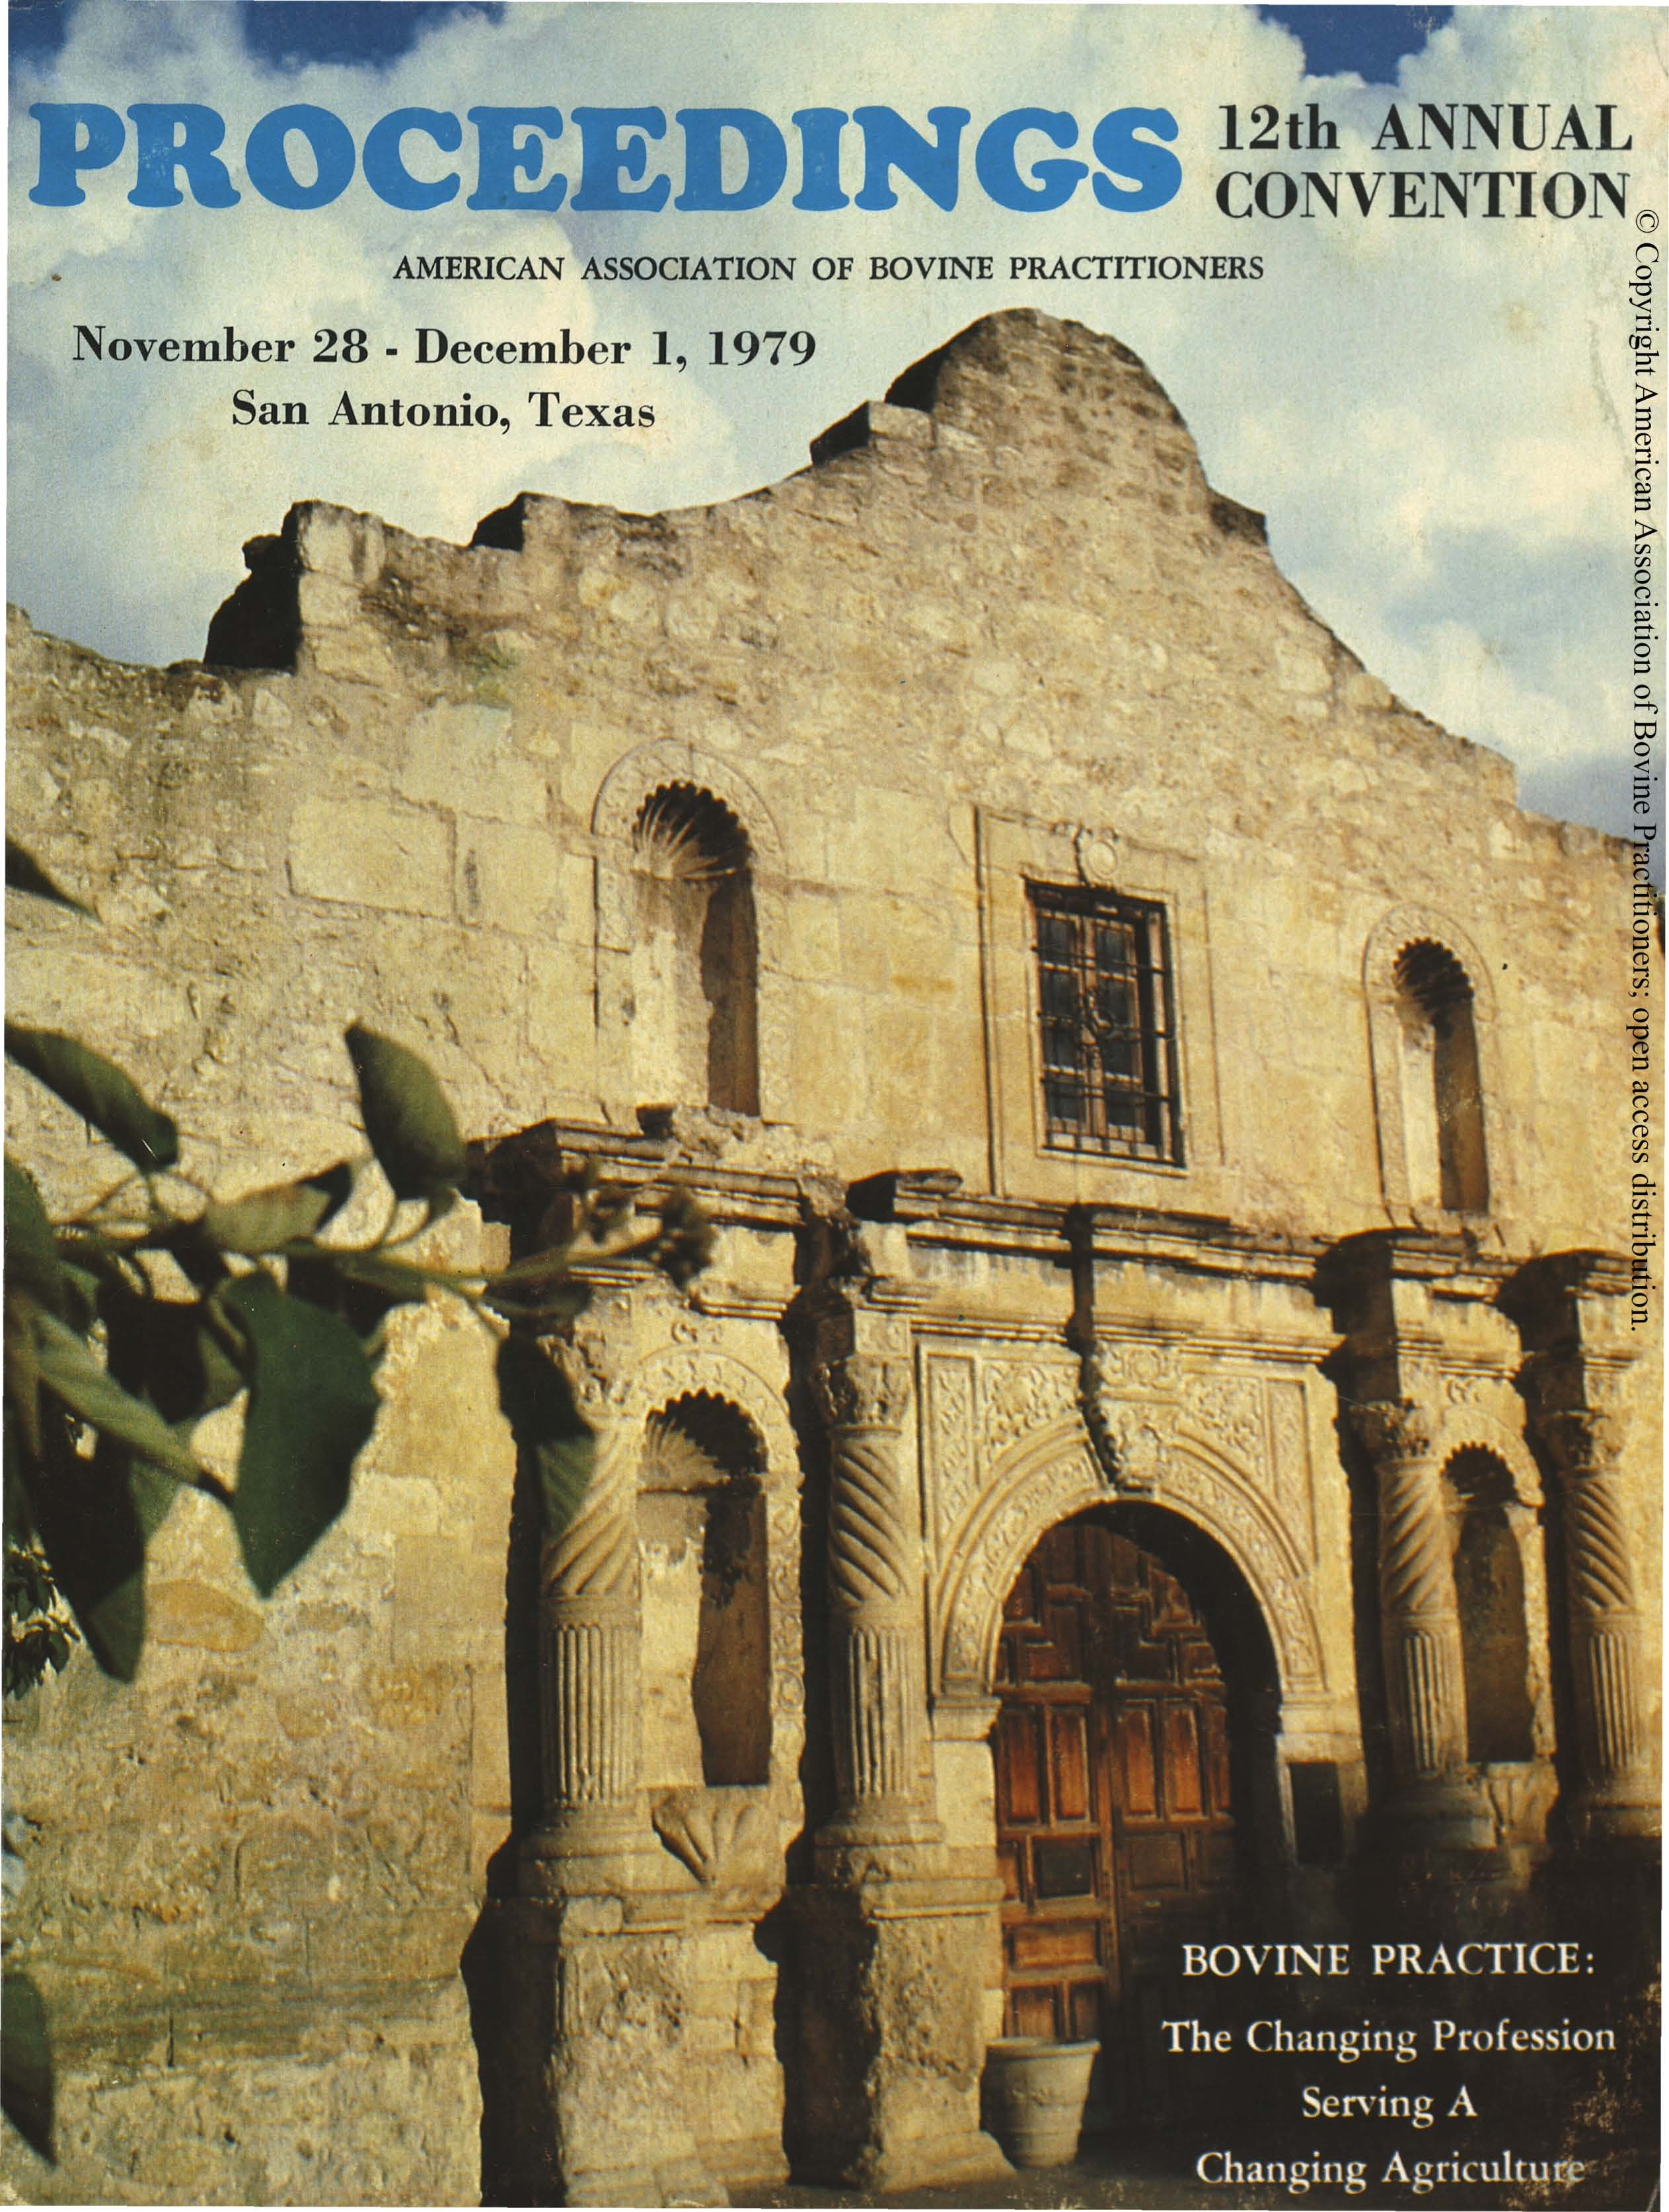 Cover image of the Proceedings of the 12th Annual Convention: Cover image is a photo of the Alamo taken against a stormy sky, journal title and conference information written across the top, and the conference theme written in the bottom left corner.